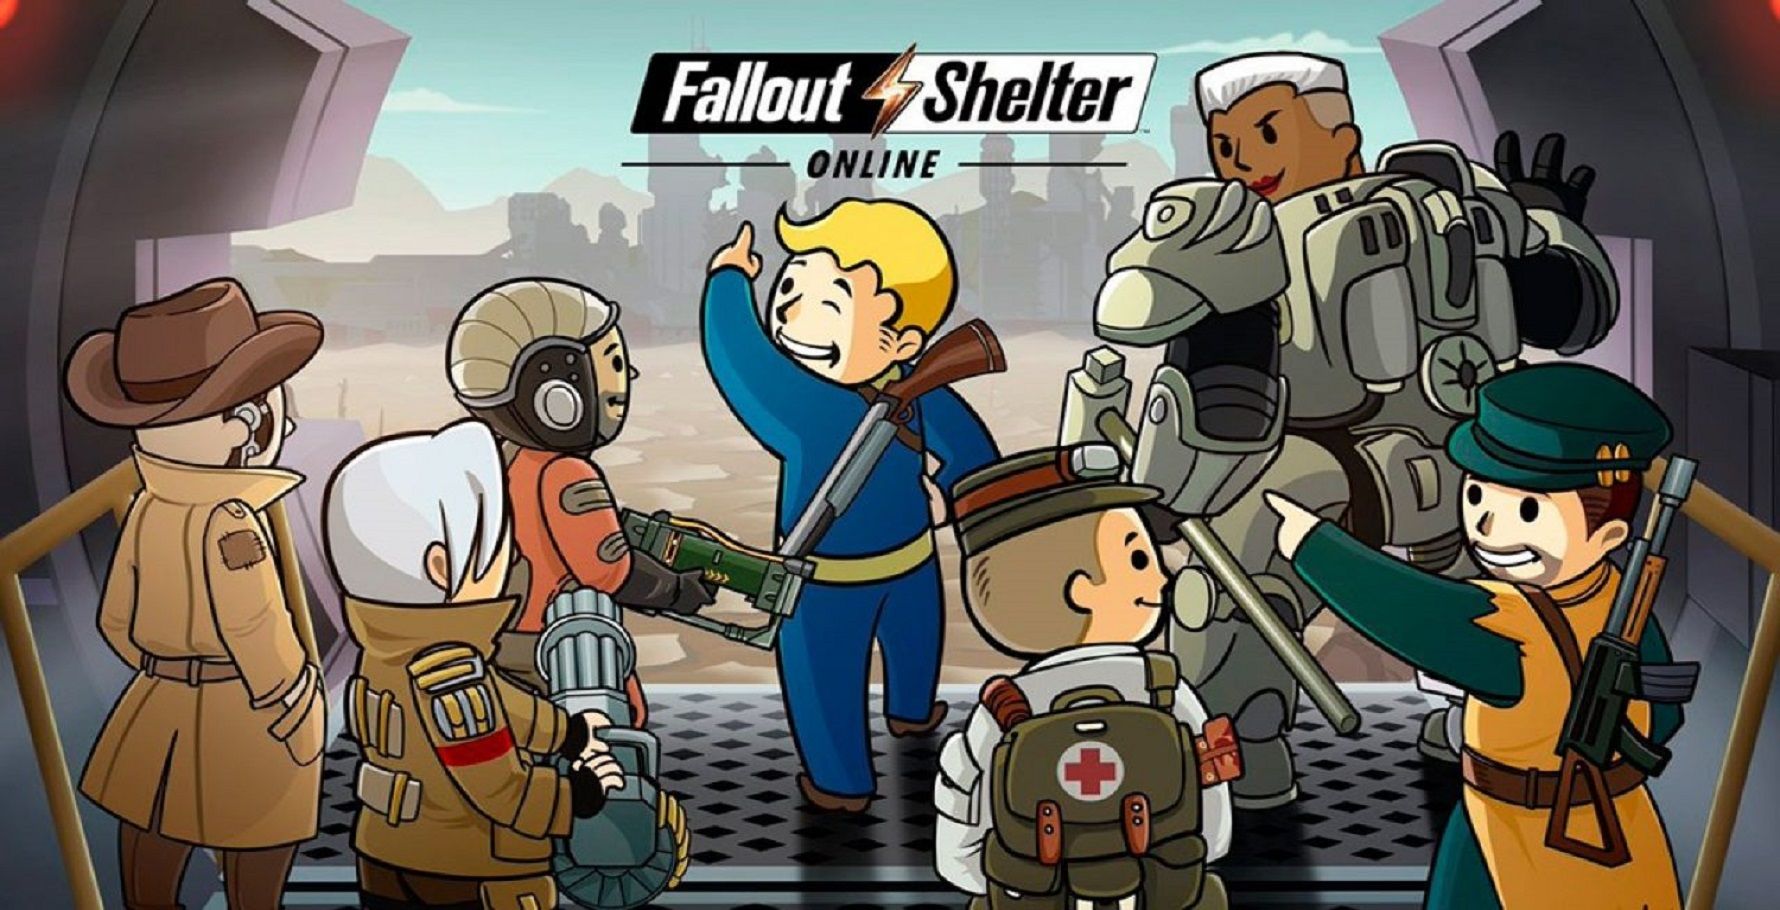 Fallout Shelter Online promotional image